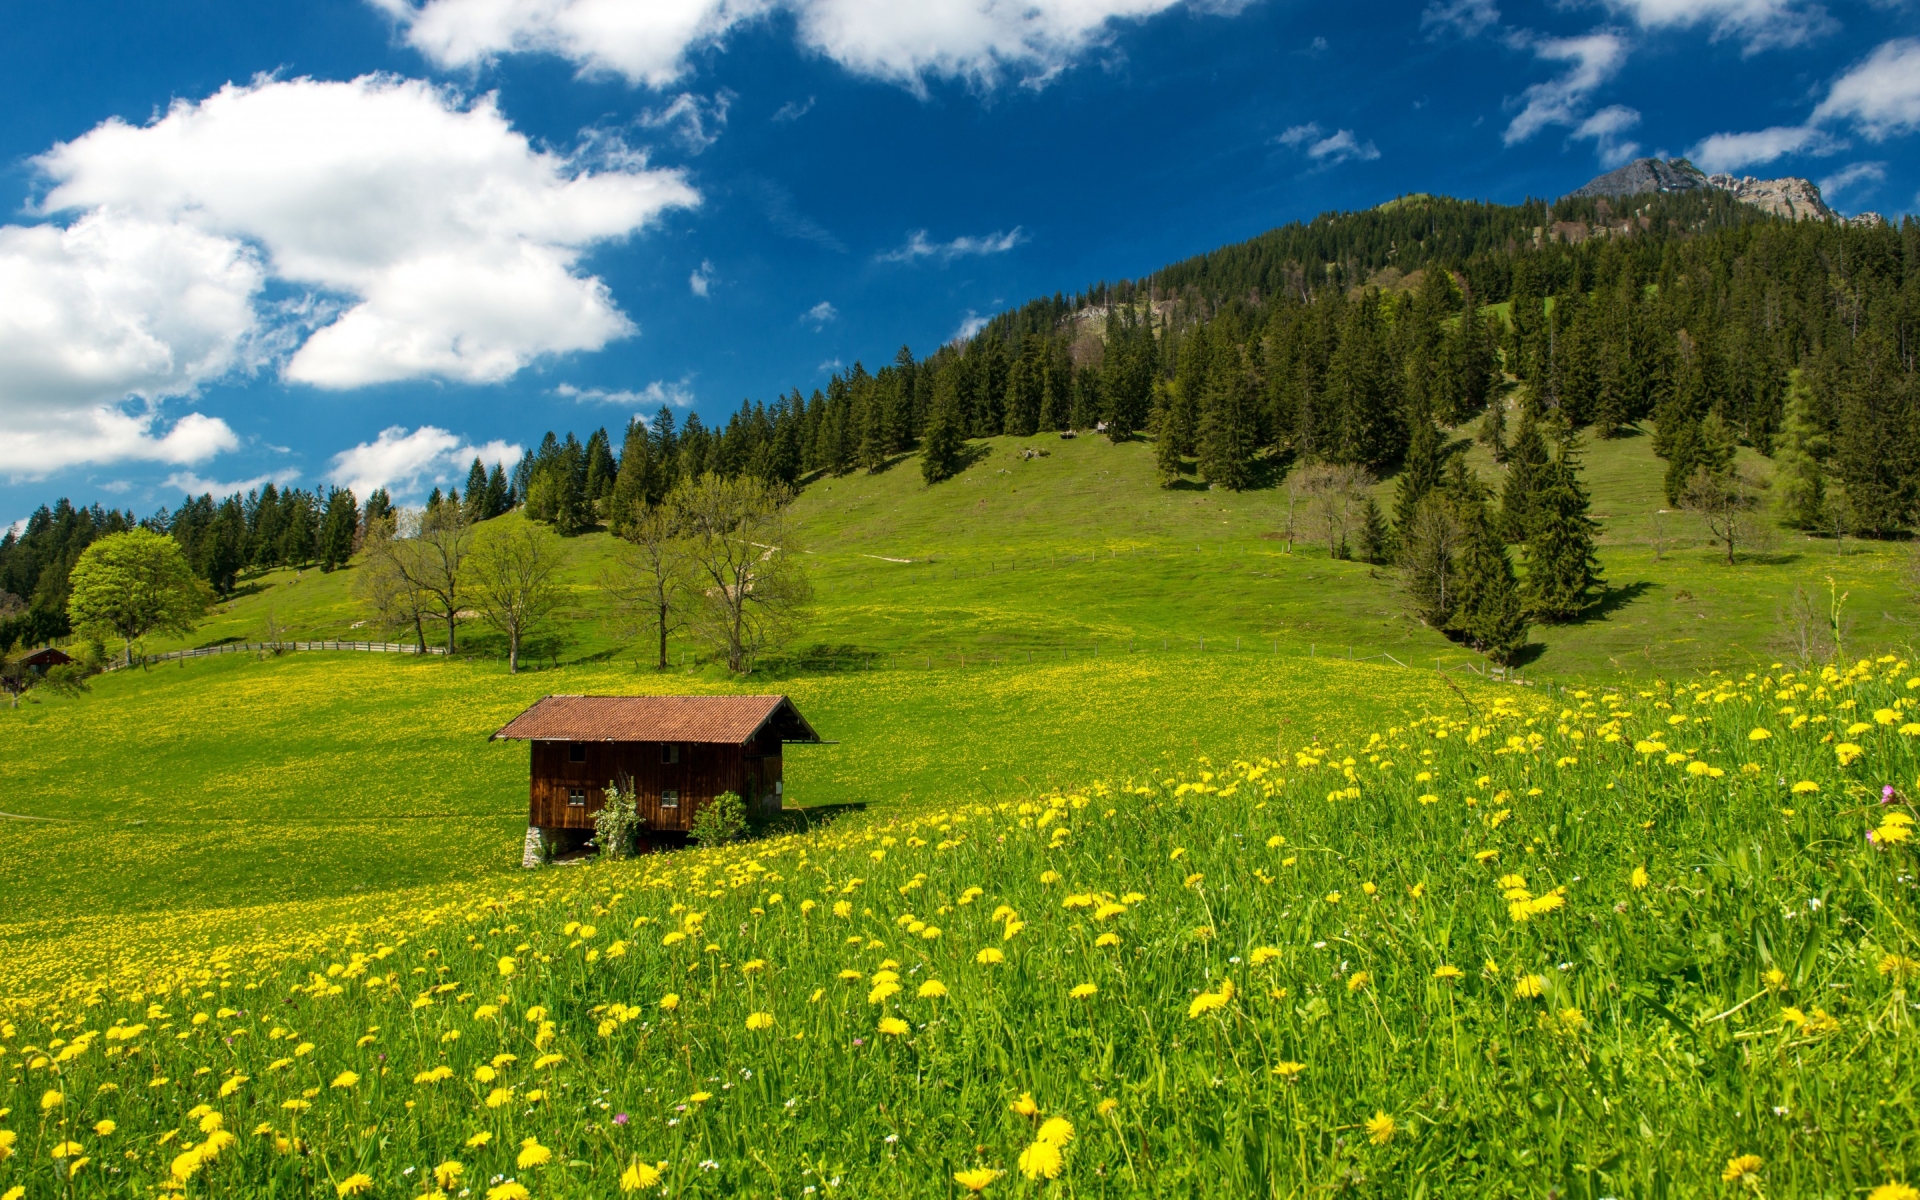 Pasture in the Bavarian Alp for 1920 x 1200 widescreen resolution